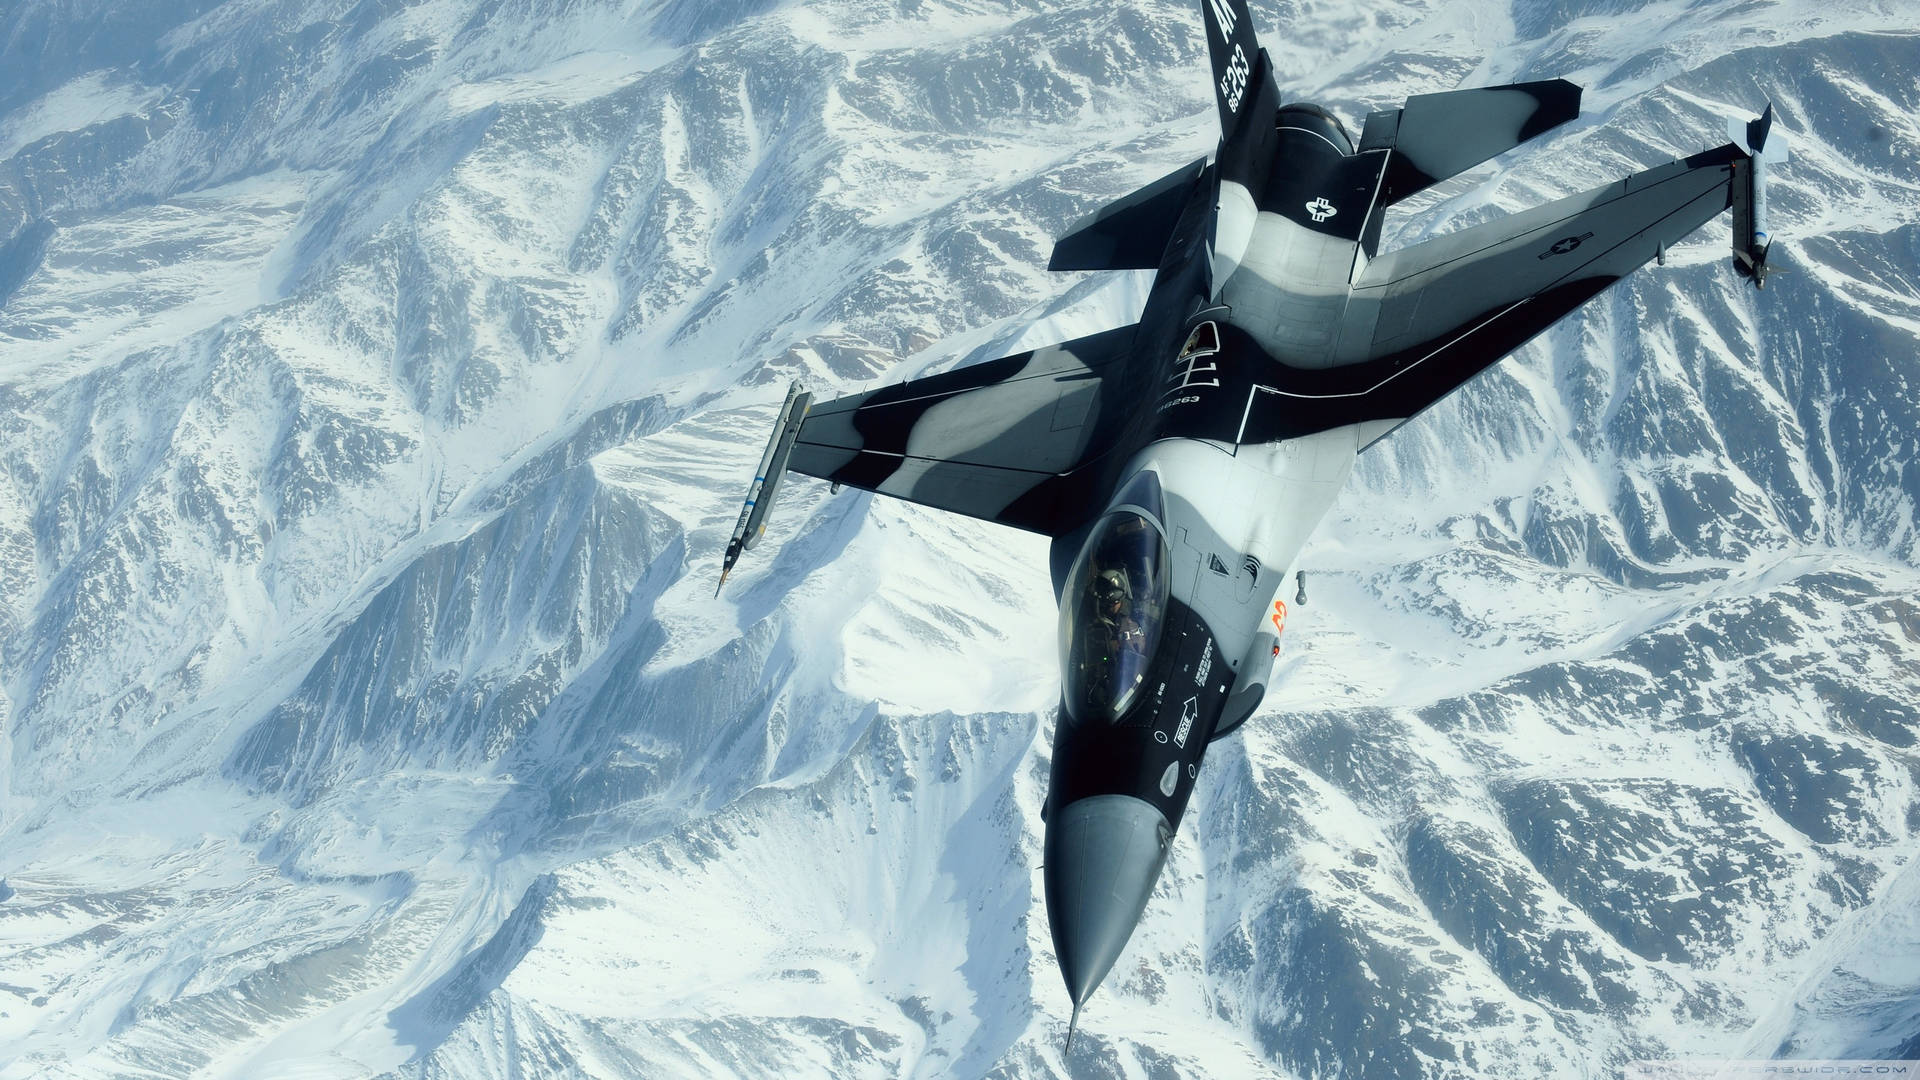 Military Jets Over Mountains Wallpaper